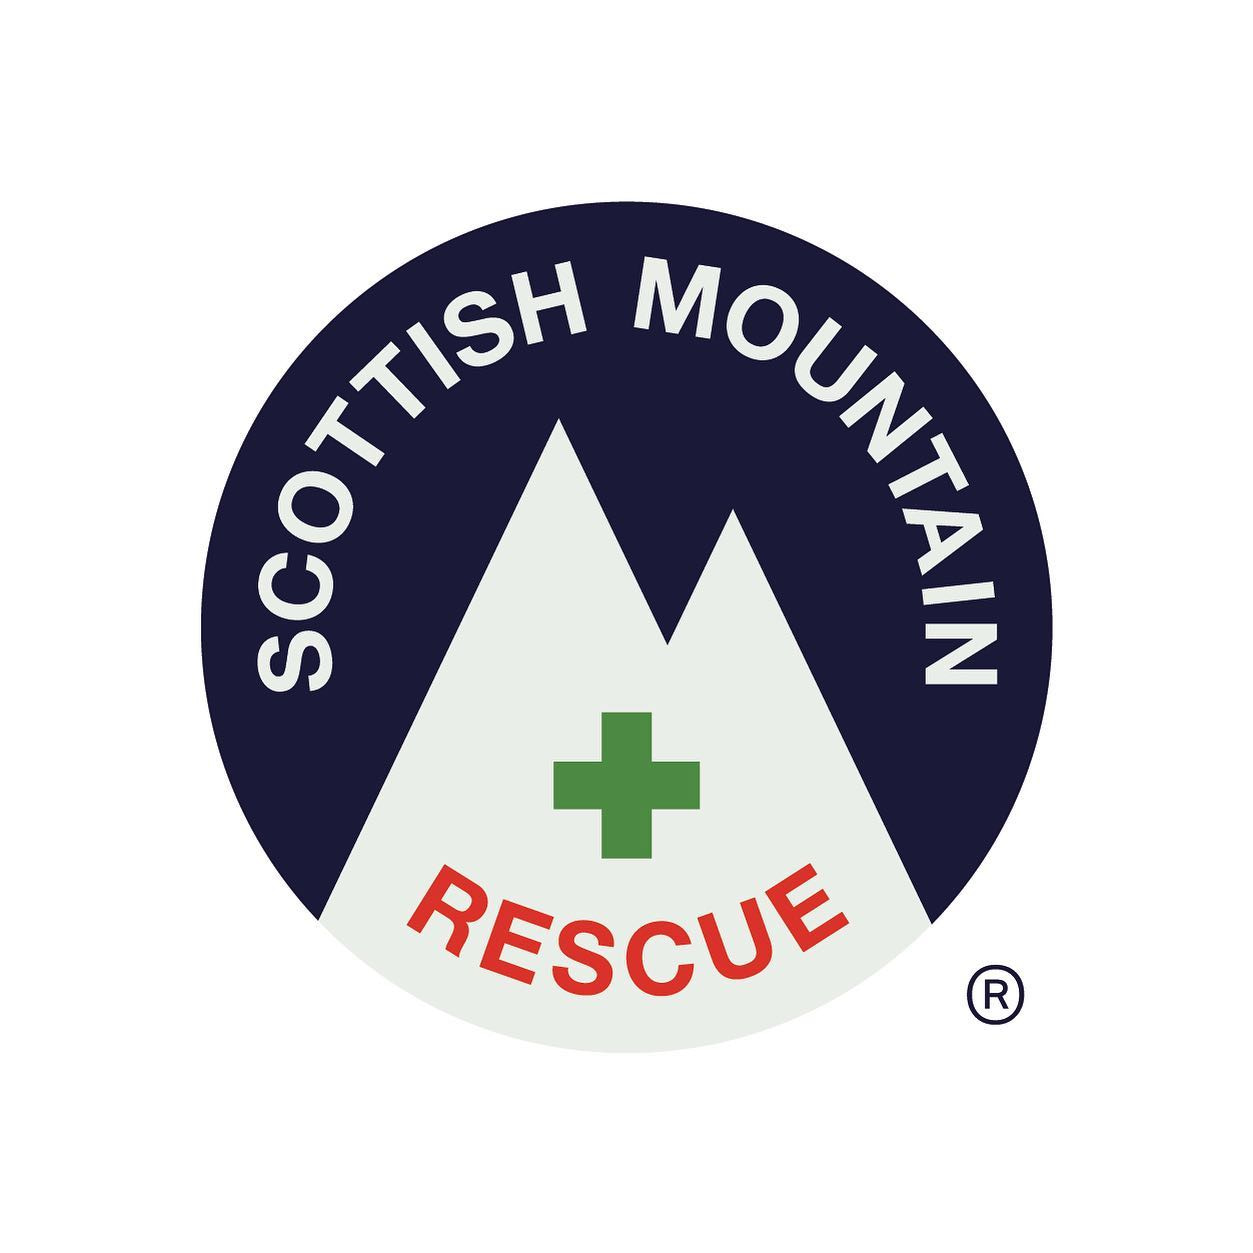 This Charity Tuesday we're celebrating @scottishmountainrescue who are joining the Peak District ...